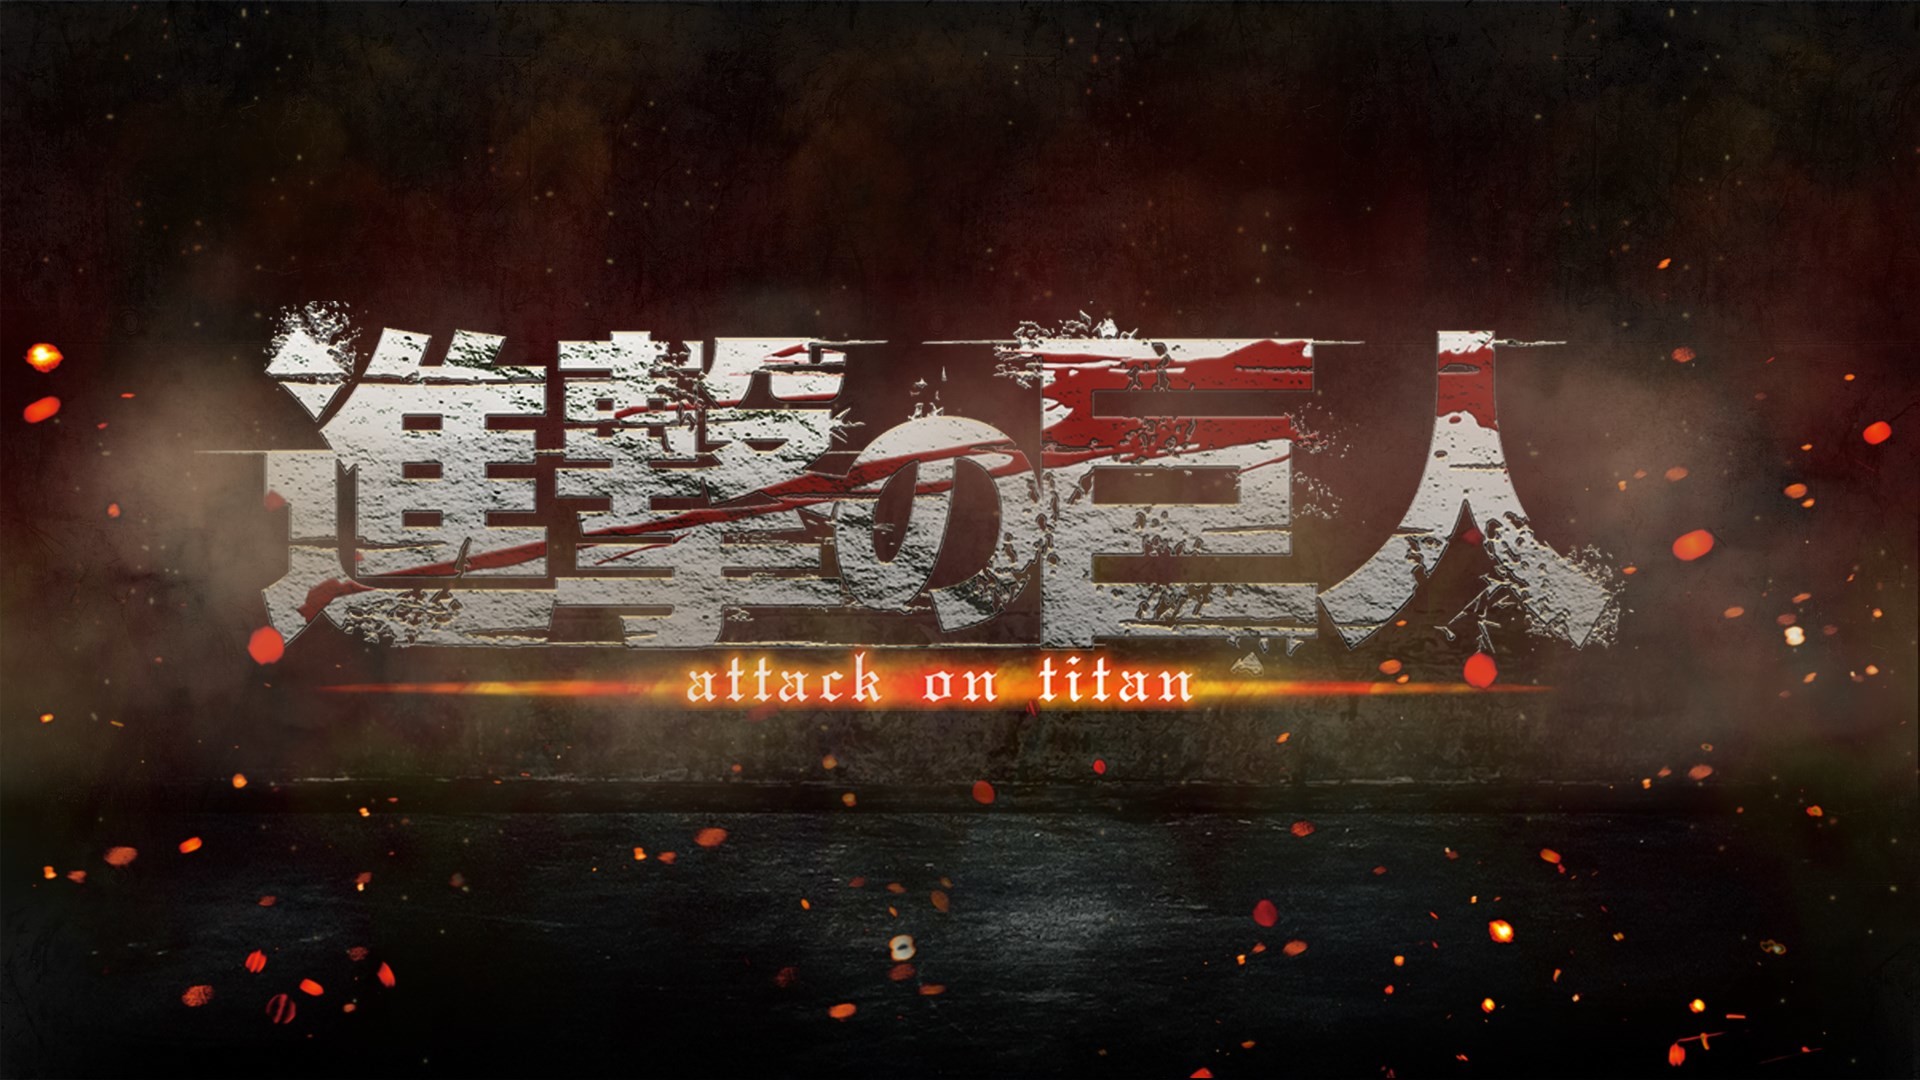 1920x1080px attack on titan wallpaper for desktop background by Nash Leapman